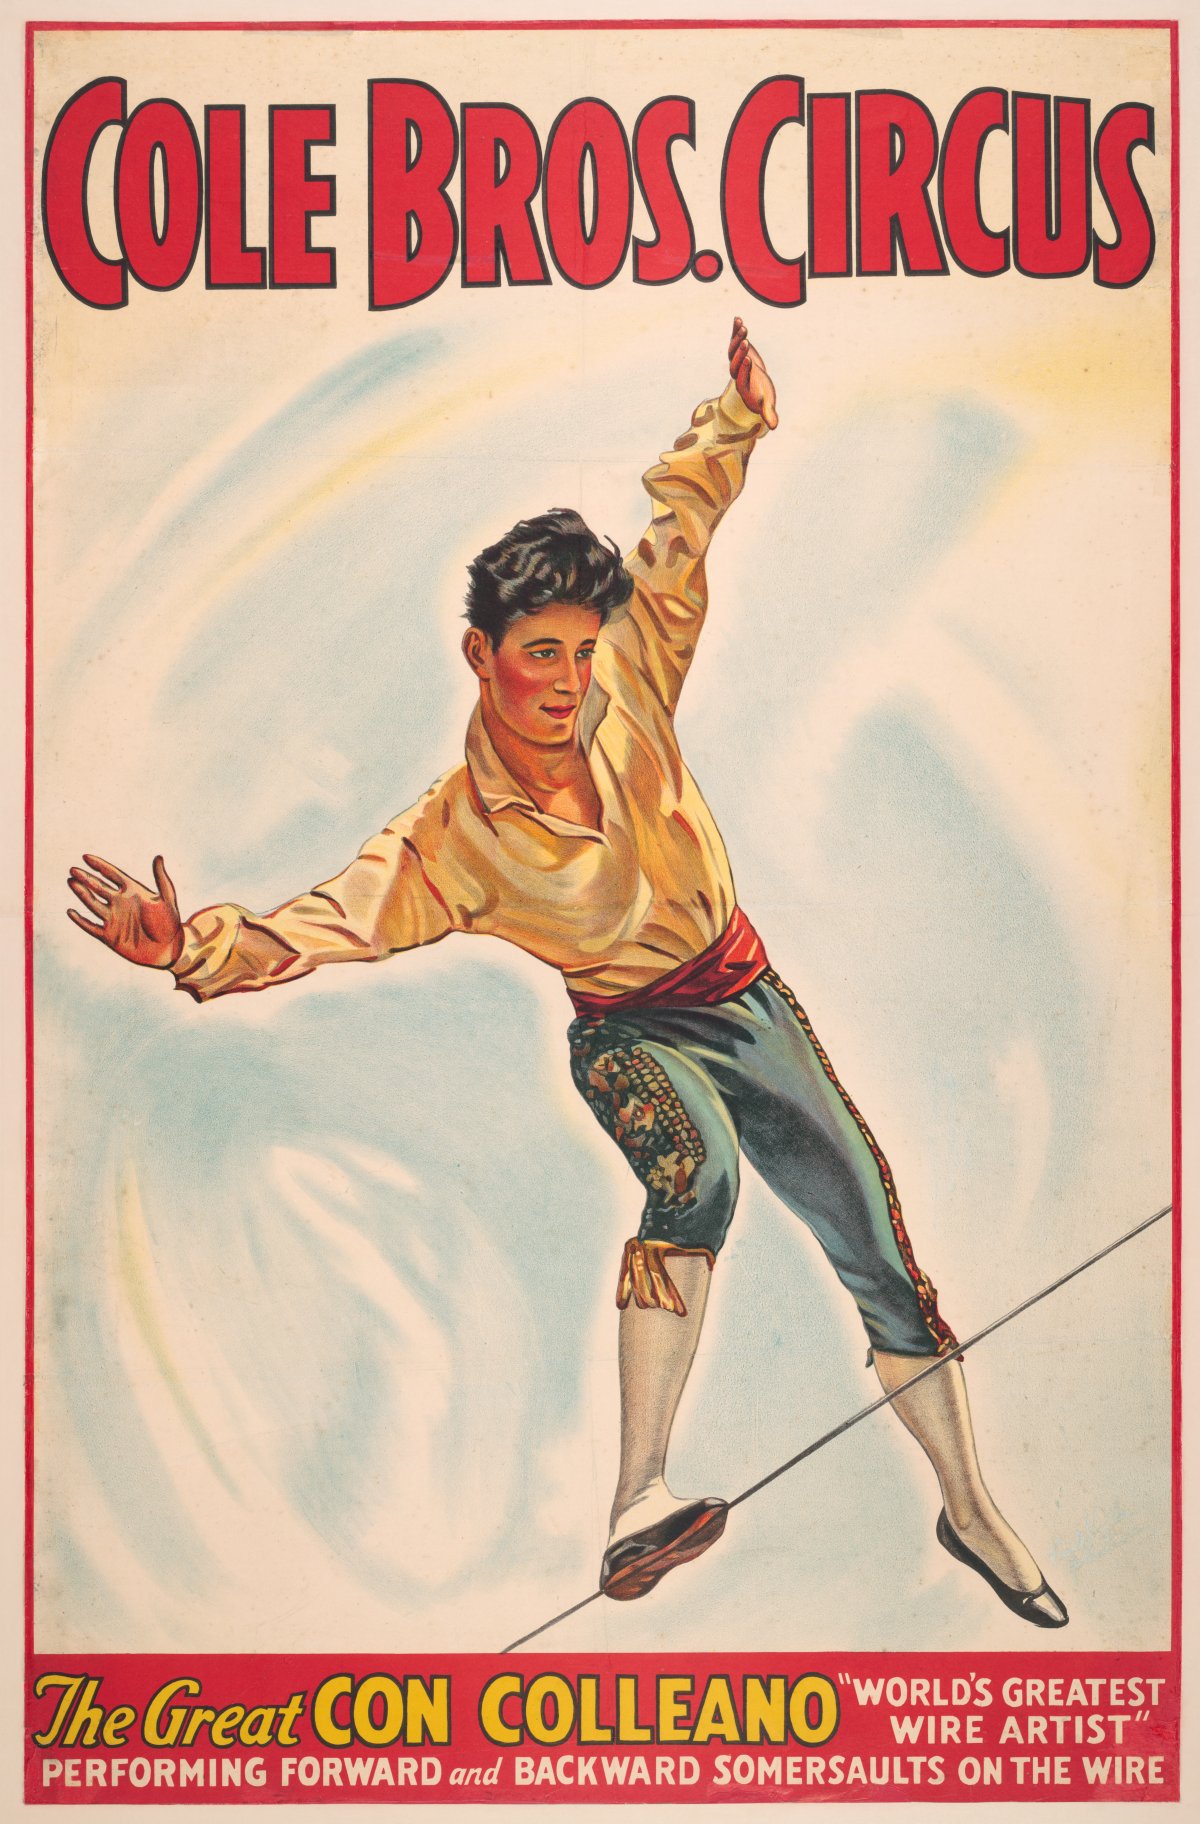 A poster advertising Cole Bros. Circus. The majority of the poster is taken up by a man in a toreador costume walking on a tightrope. At the bottom reads the line "The Great Con Colleano world's greatest wire artist performing forward and backward somersaults on the wire"